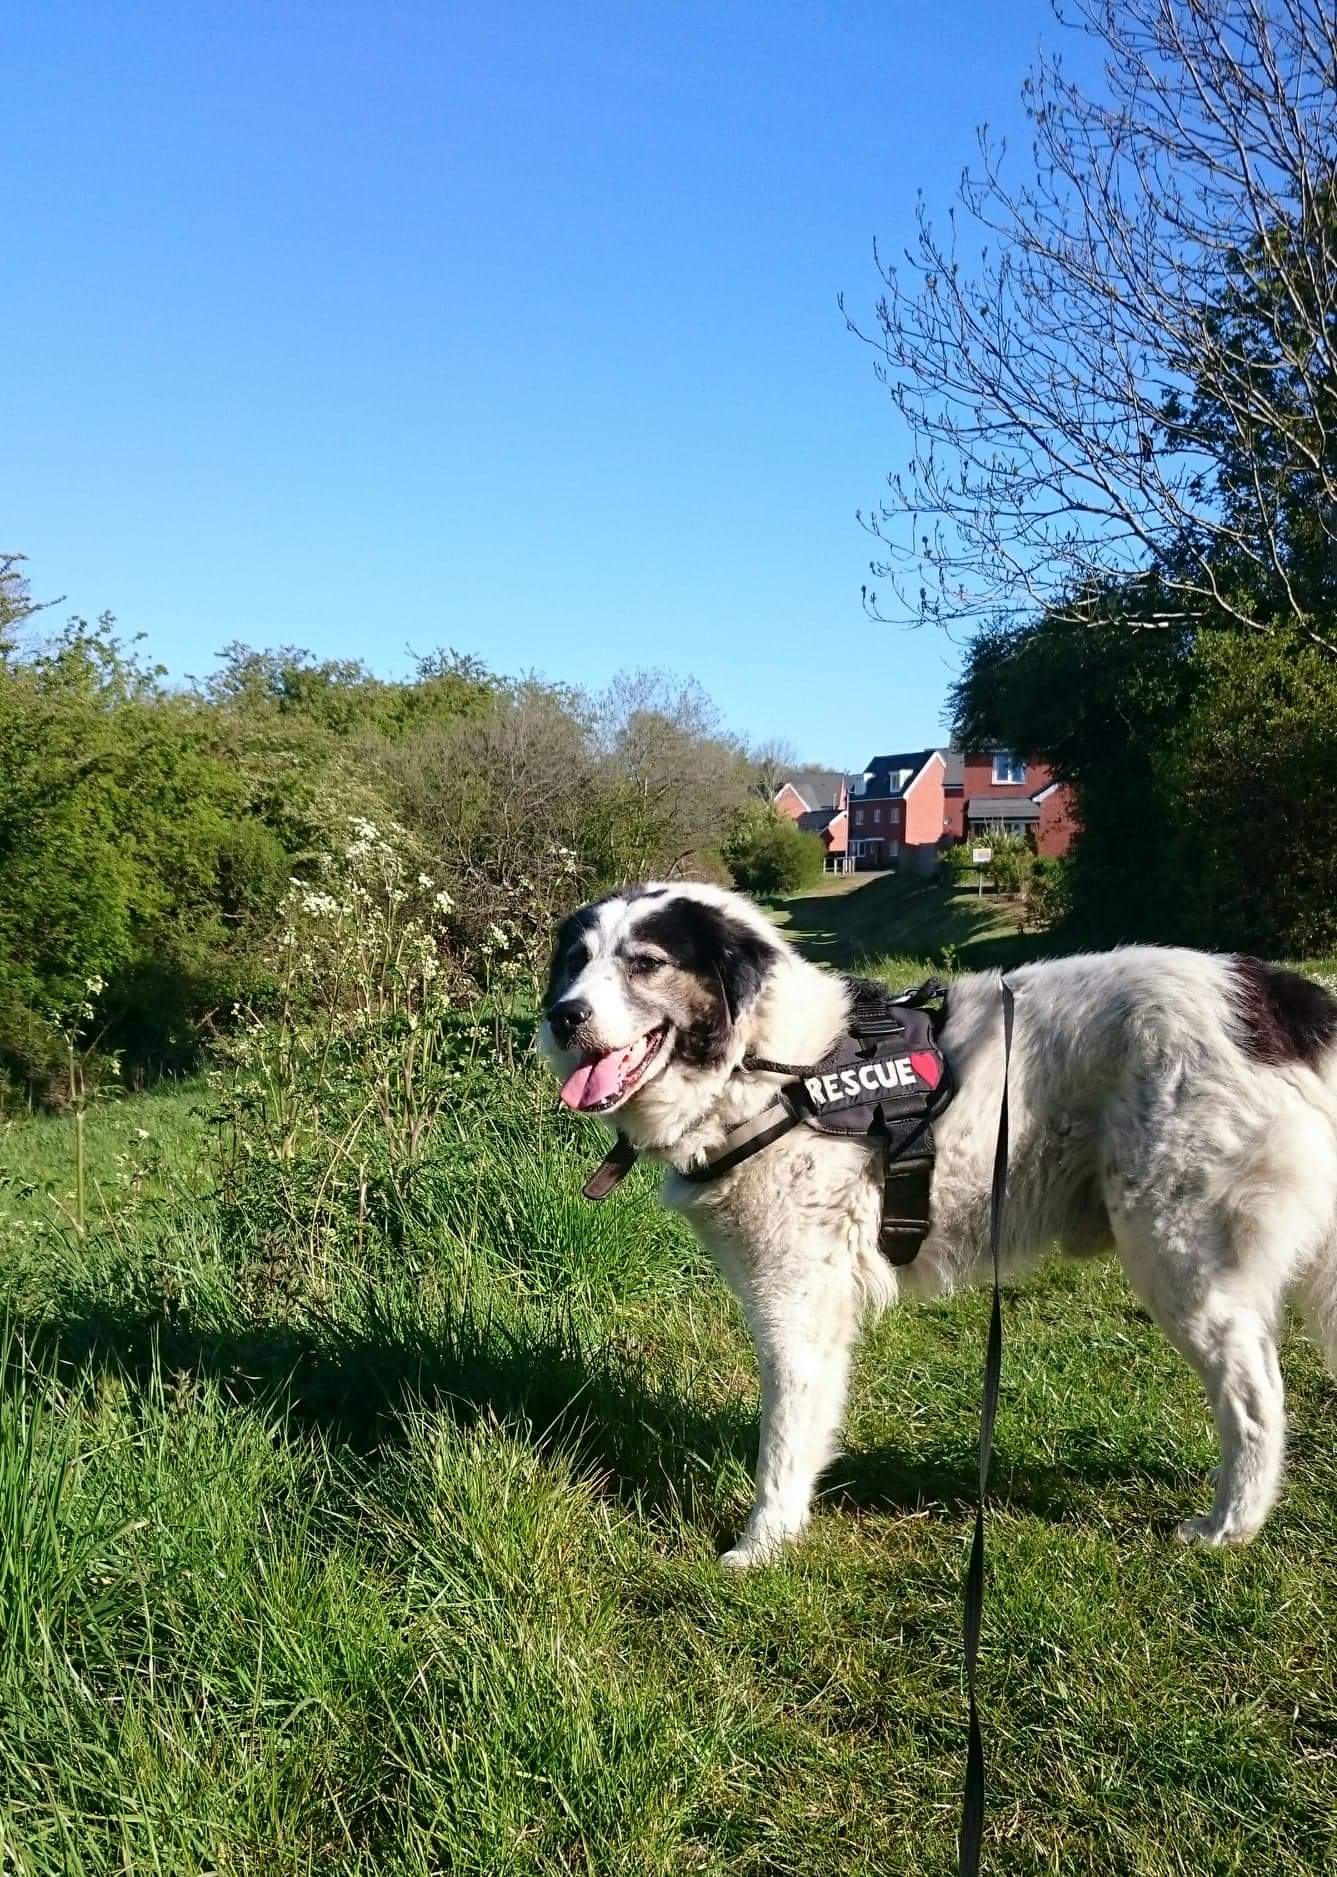 Leo a Romanian street dog on a walk | 1 Dog At a Time Rescue UK